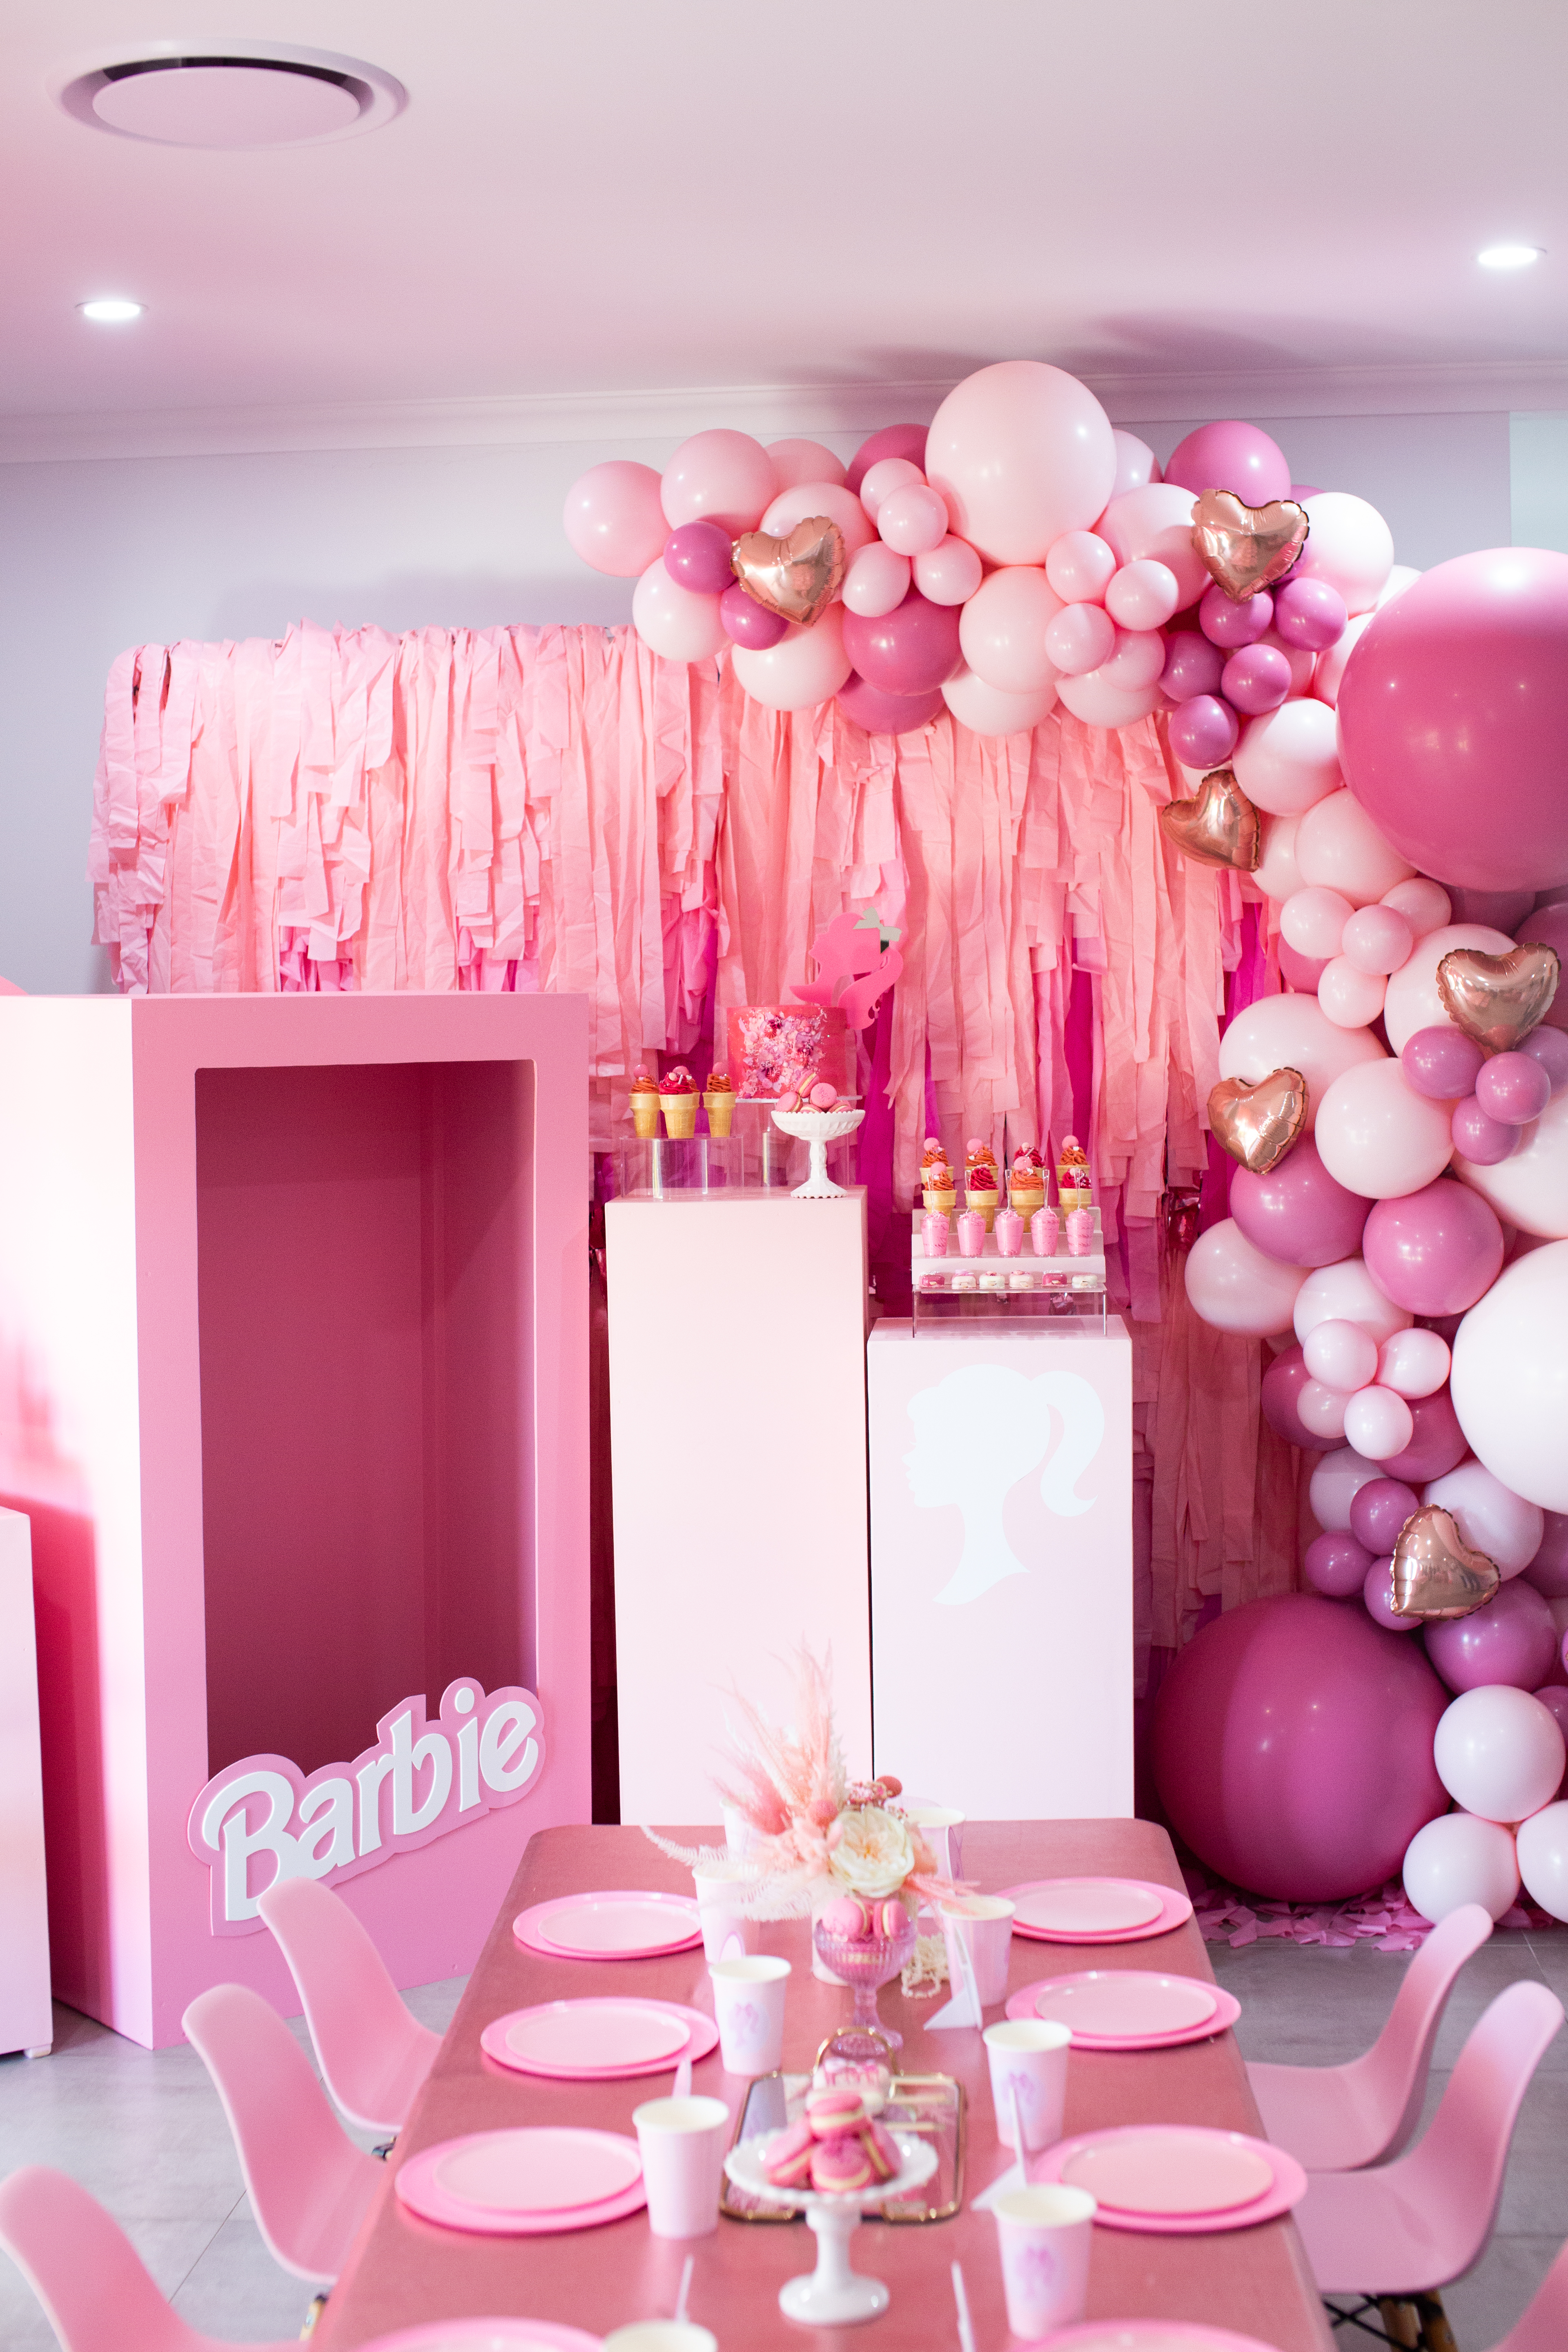 Barbie photo booth box from Creative Themes Perth